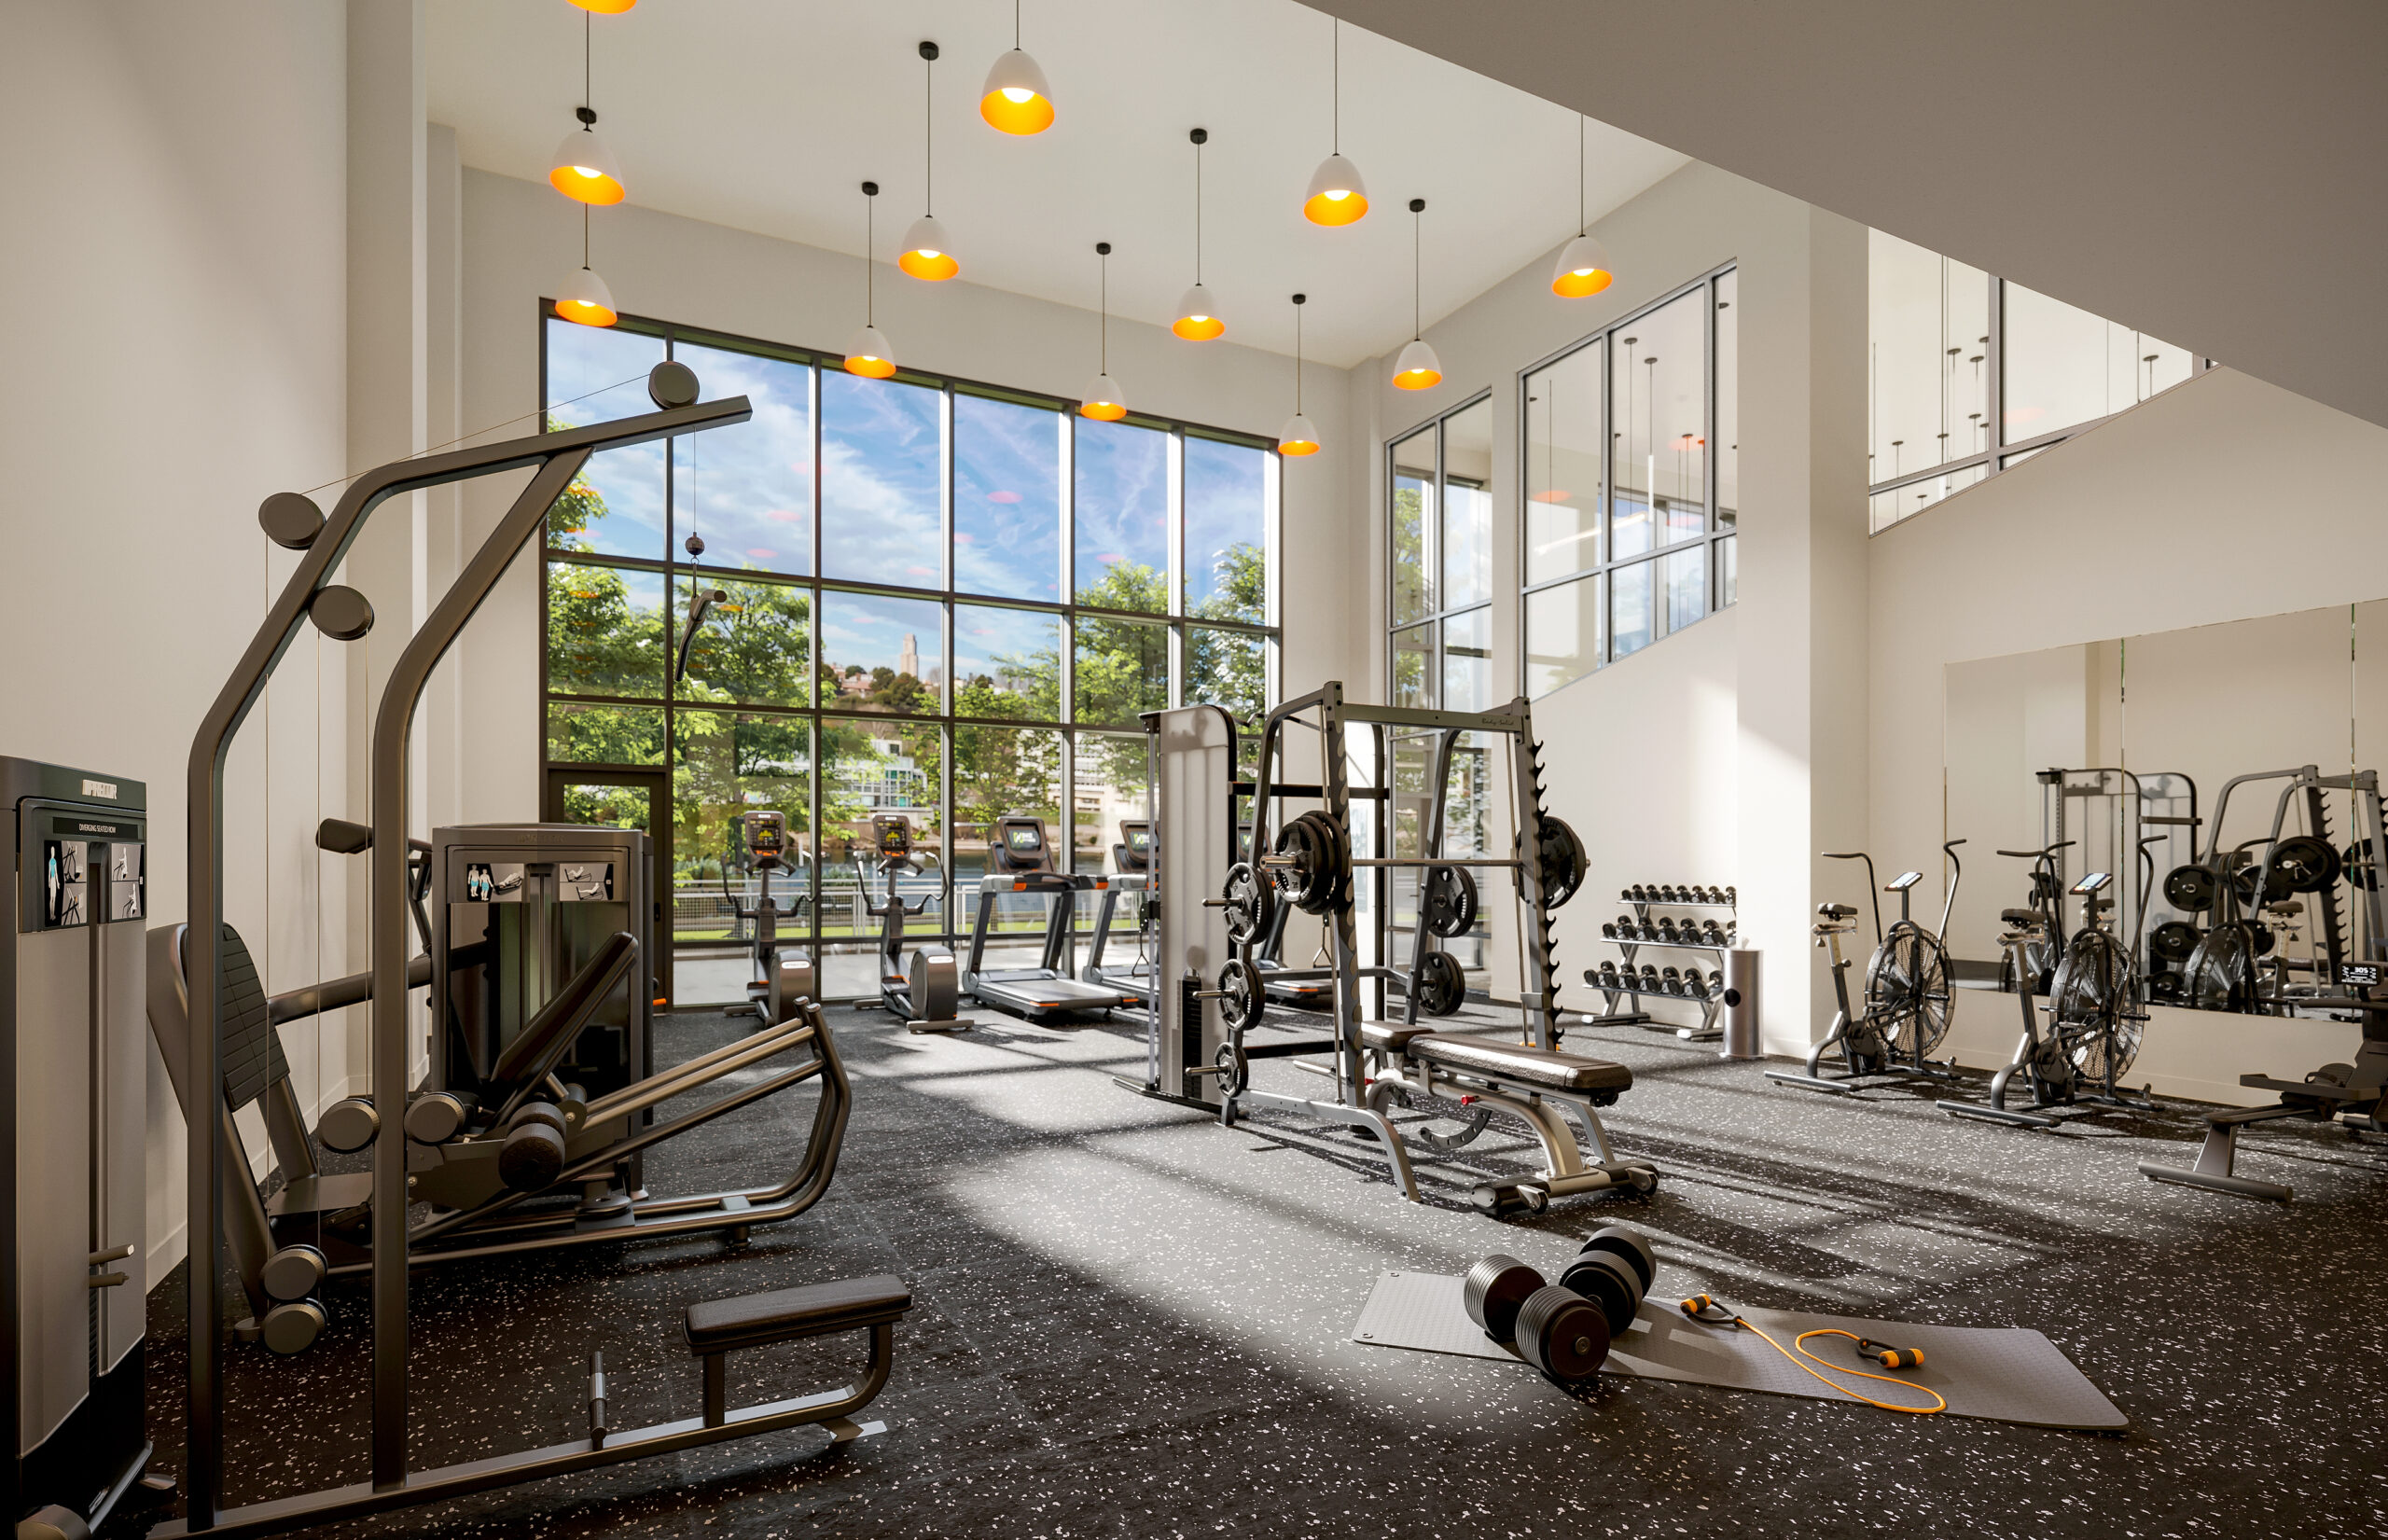 A photo of the gym area at the Park apartments at SouthSide Works.